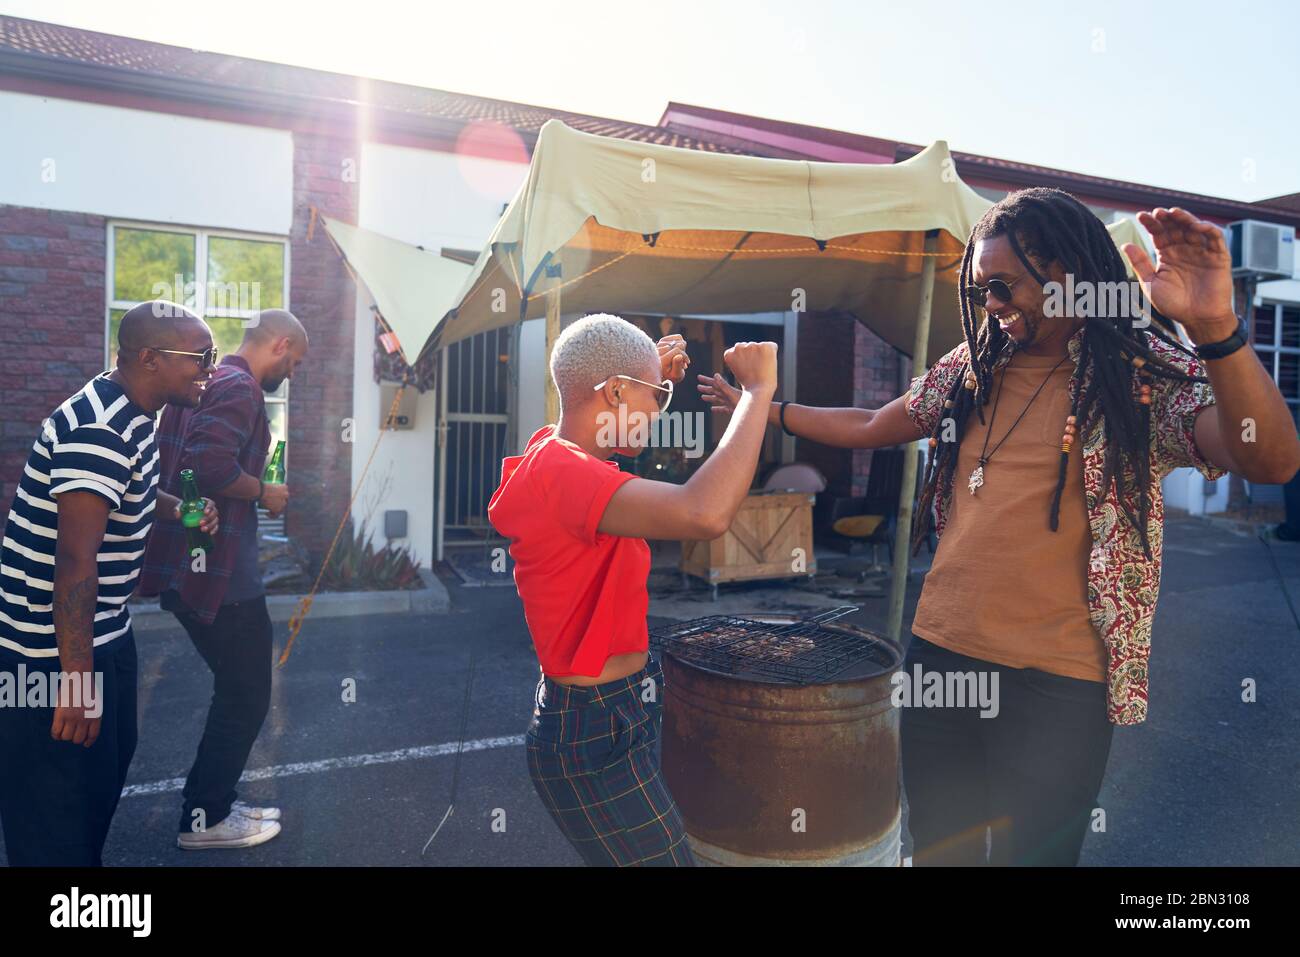 Carefree friends dancing and barbecuing in sunny parking lot Stock Photo